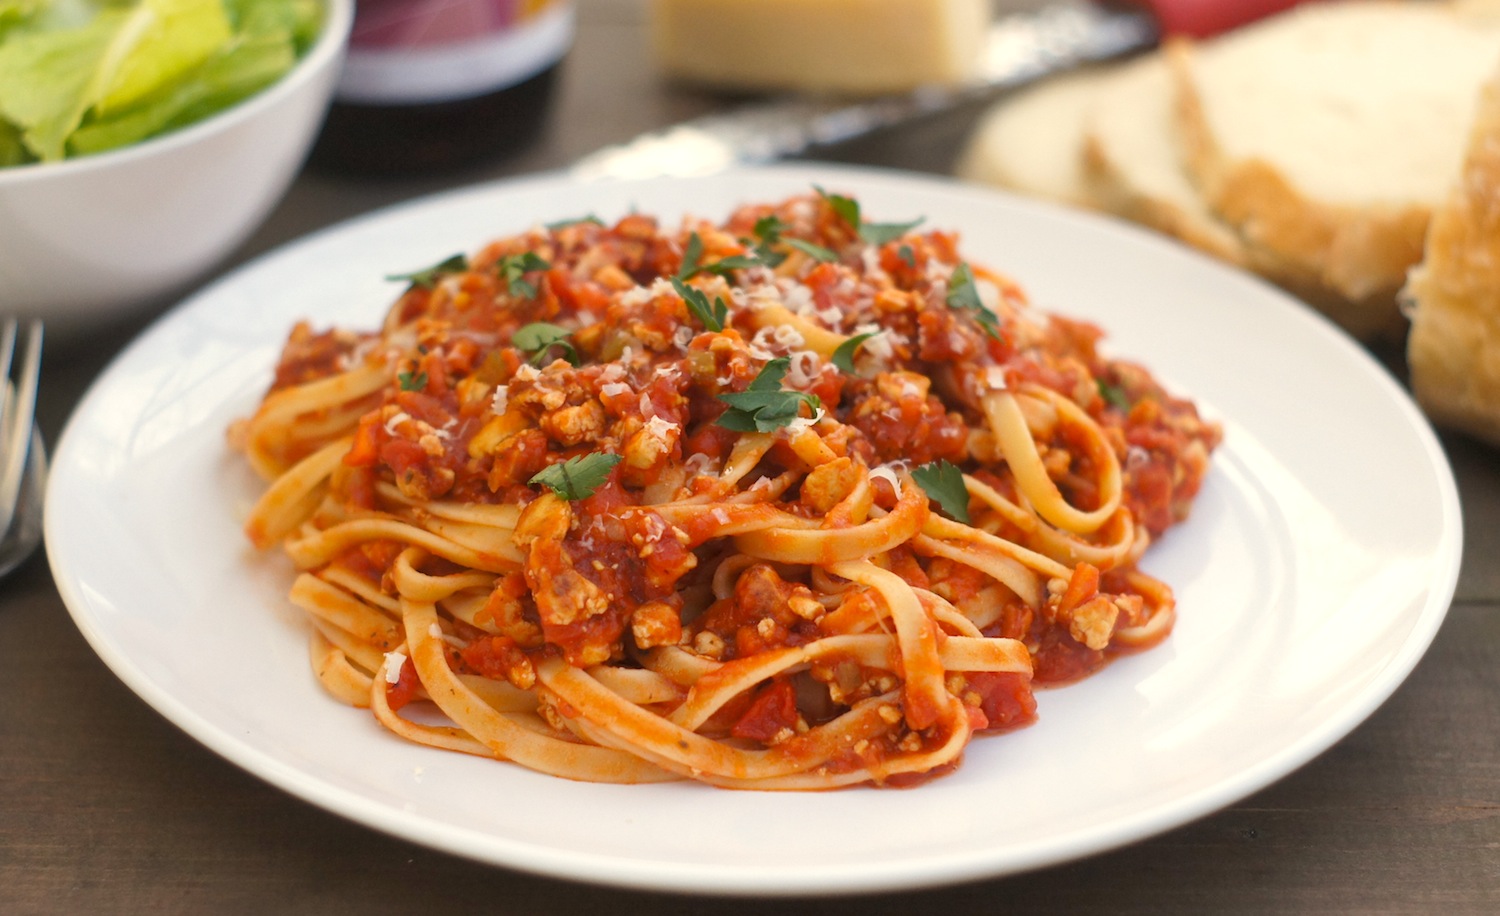 Pasta with Tofu "Bolognese"